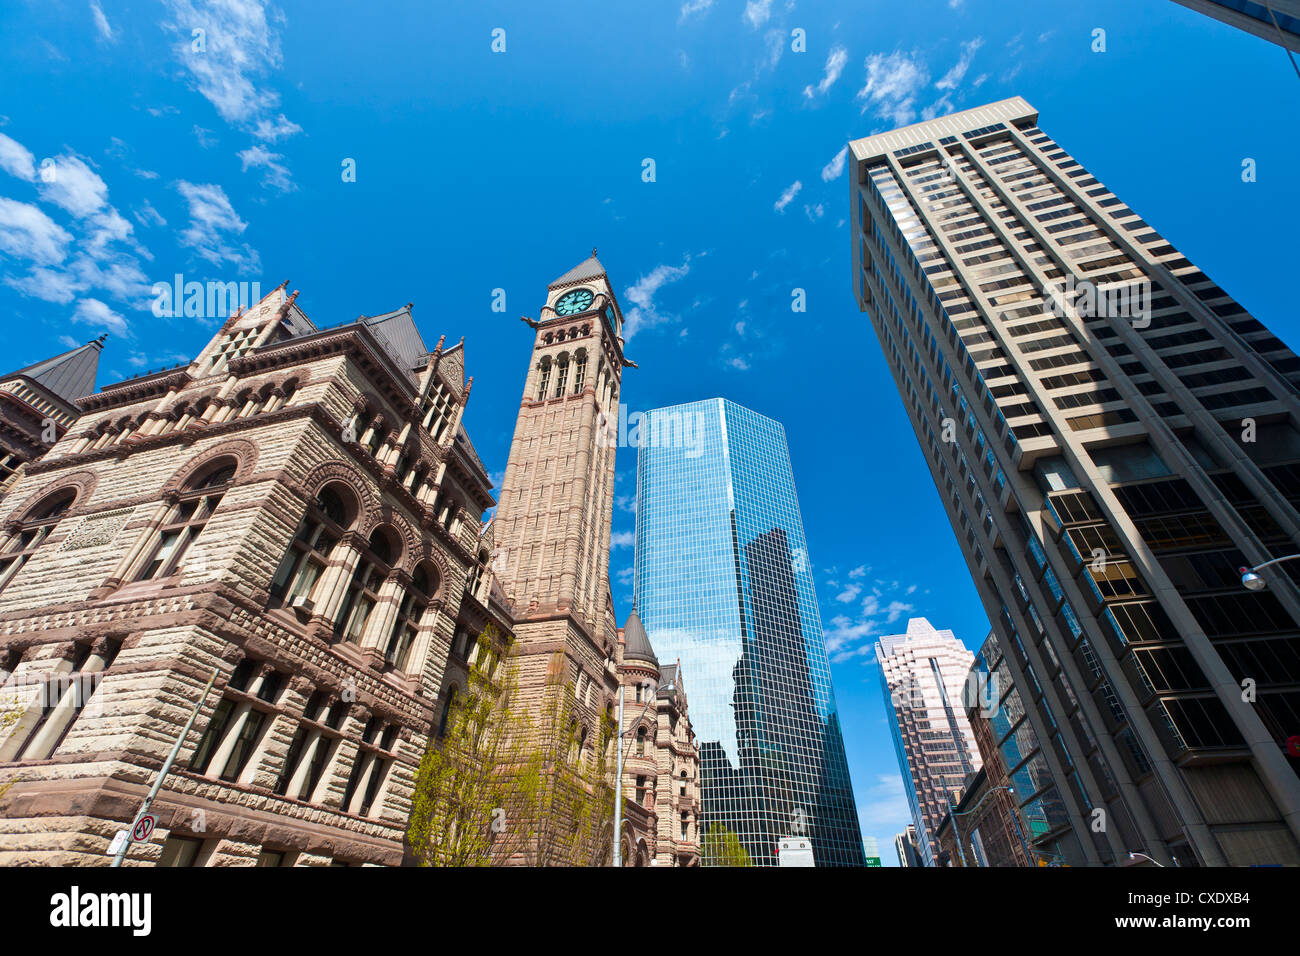 Old City Hall contrasting with modern skyscrapers, Toronto, Ontario, Canada, North America Stock Photo